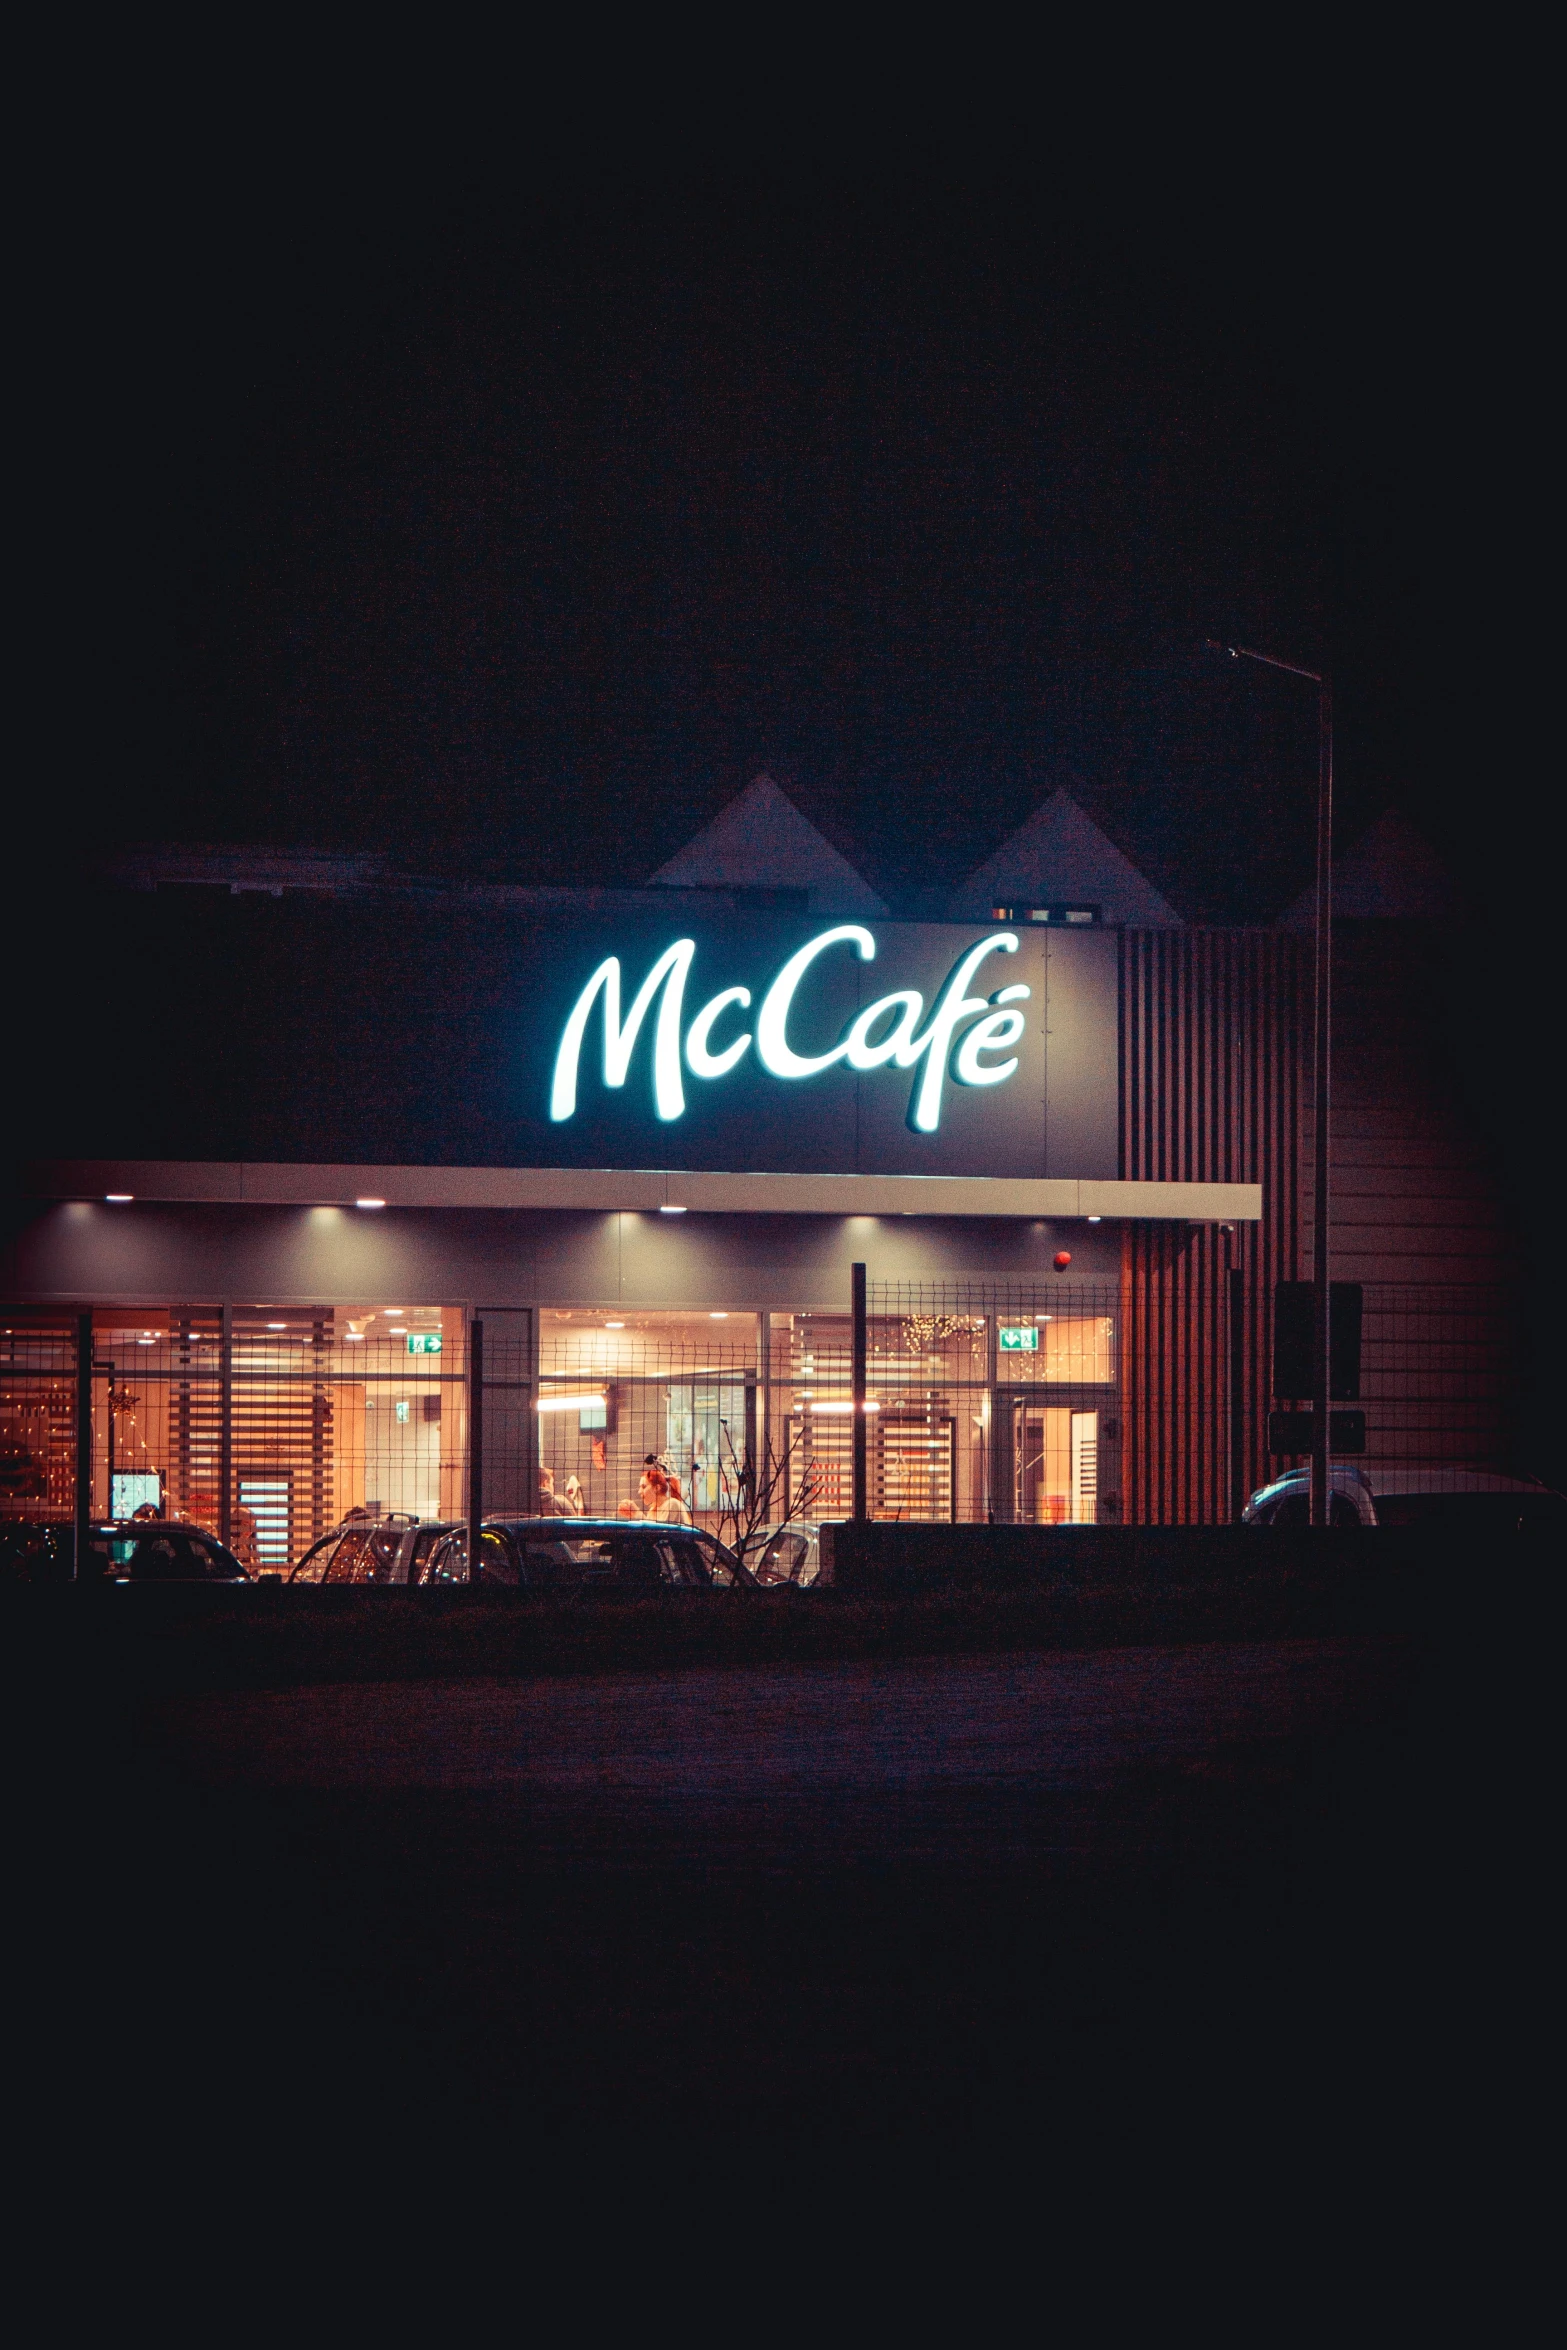 a mcdonald's in a dark building with it's lit sign at night